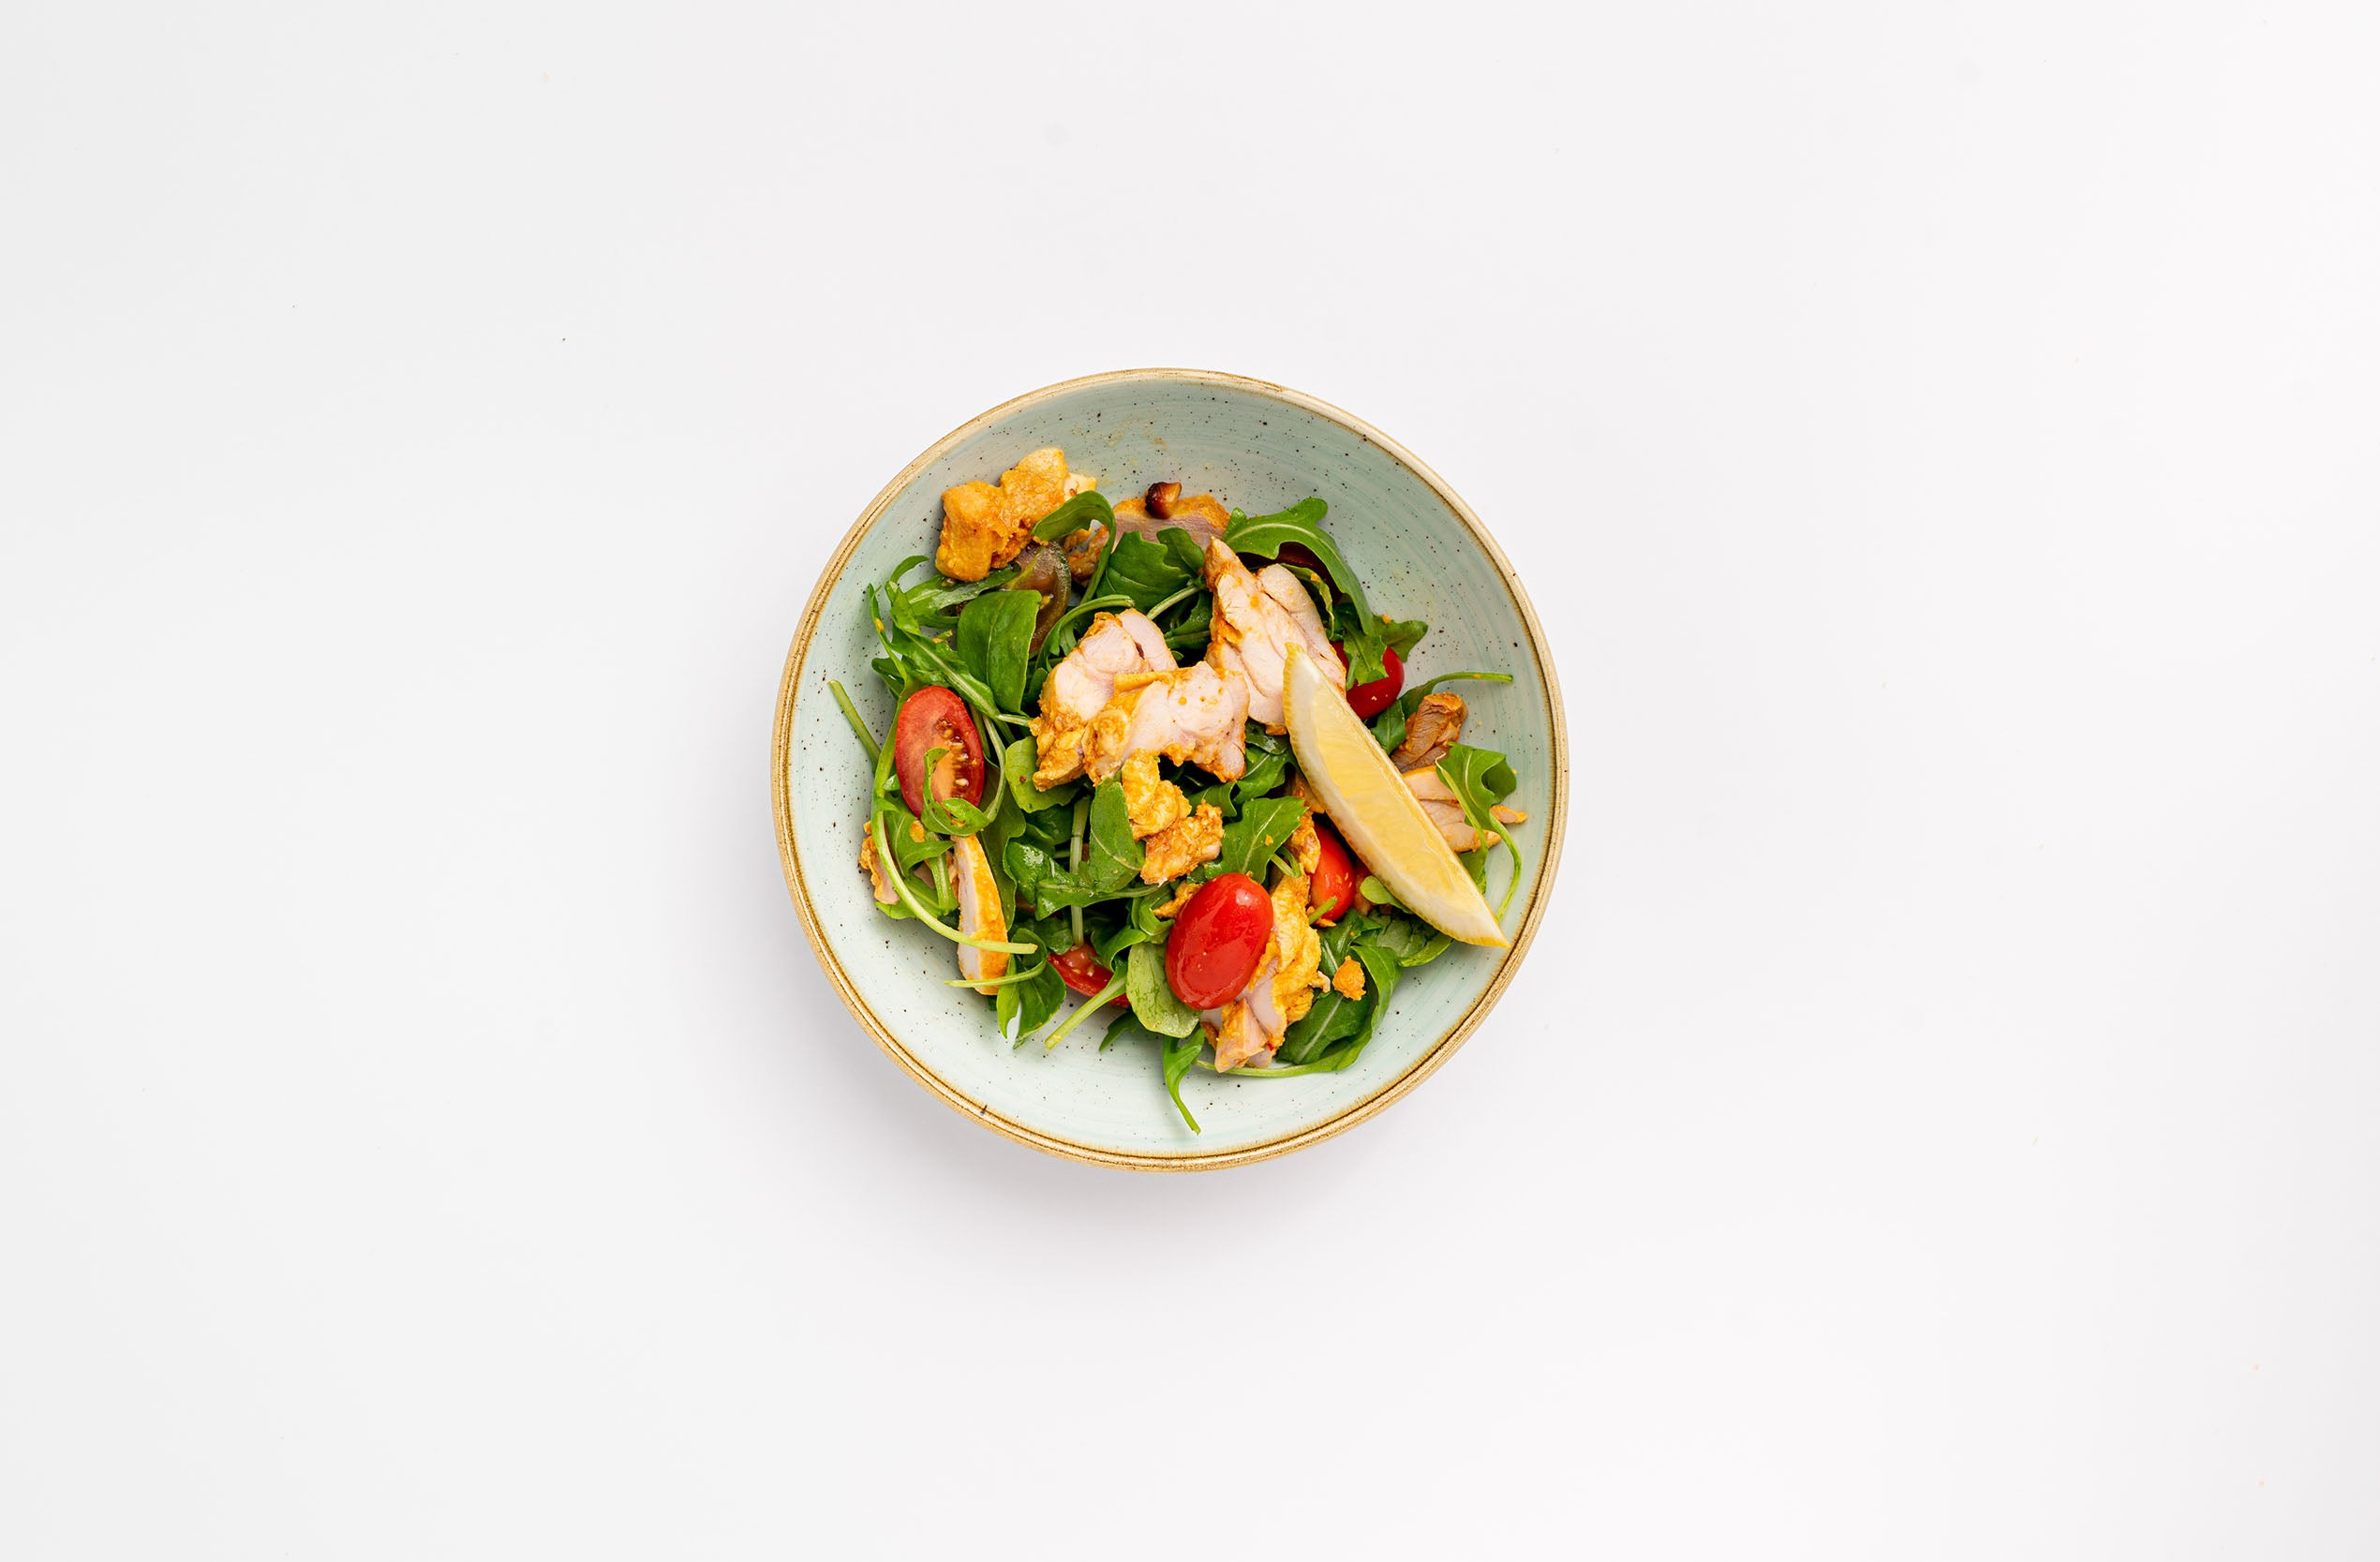 Grilled Lemon Chicken and Rocket Salad with Cherry Tomato and Smoked Paprika